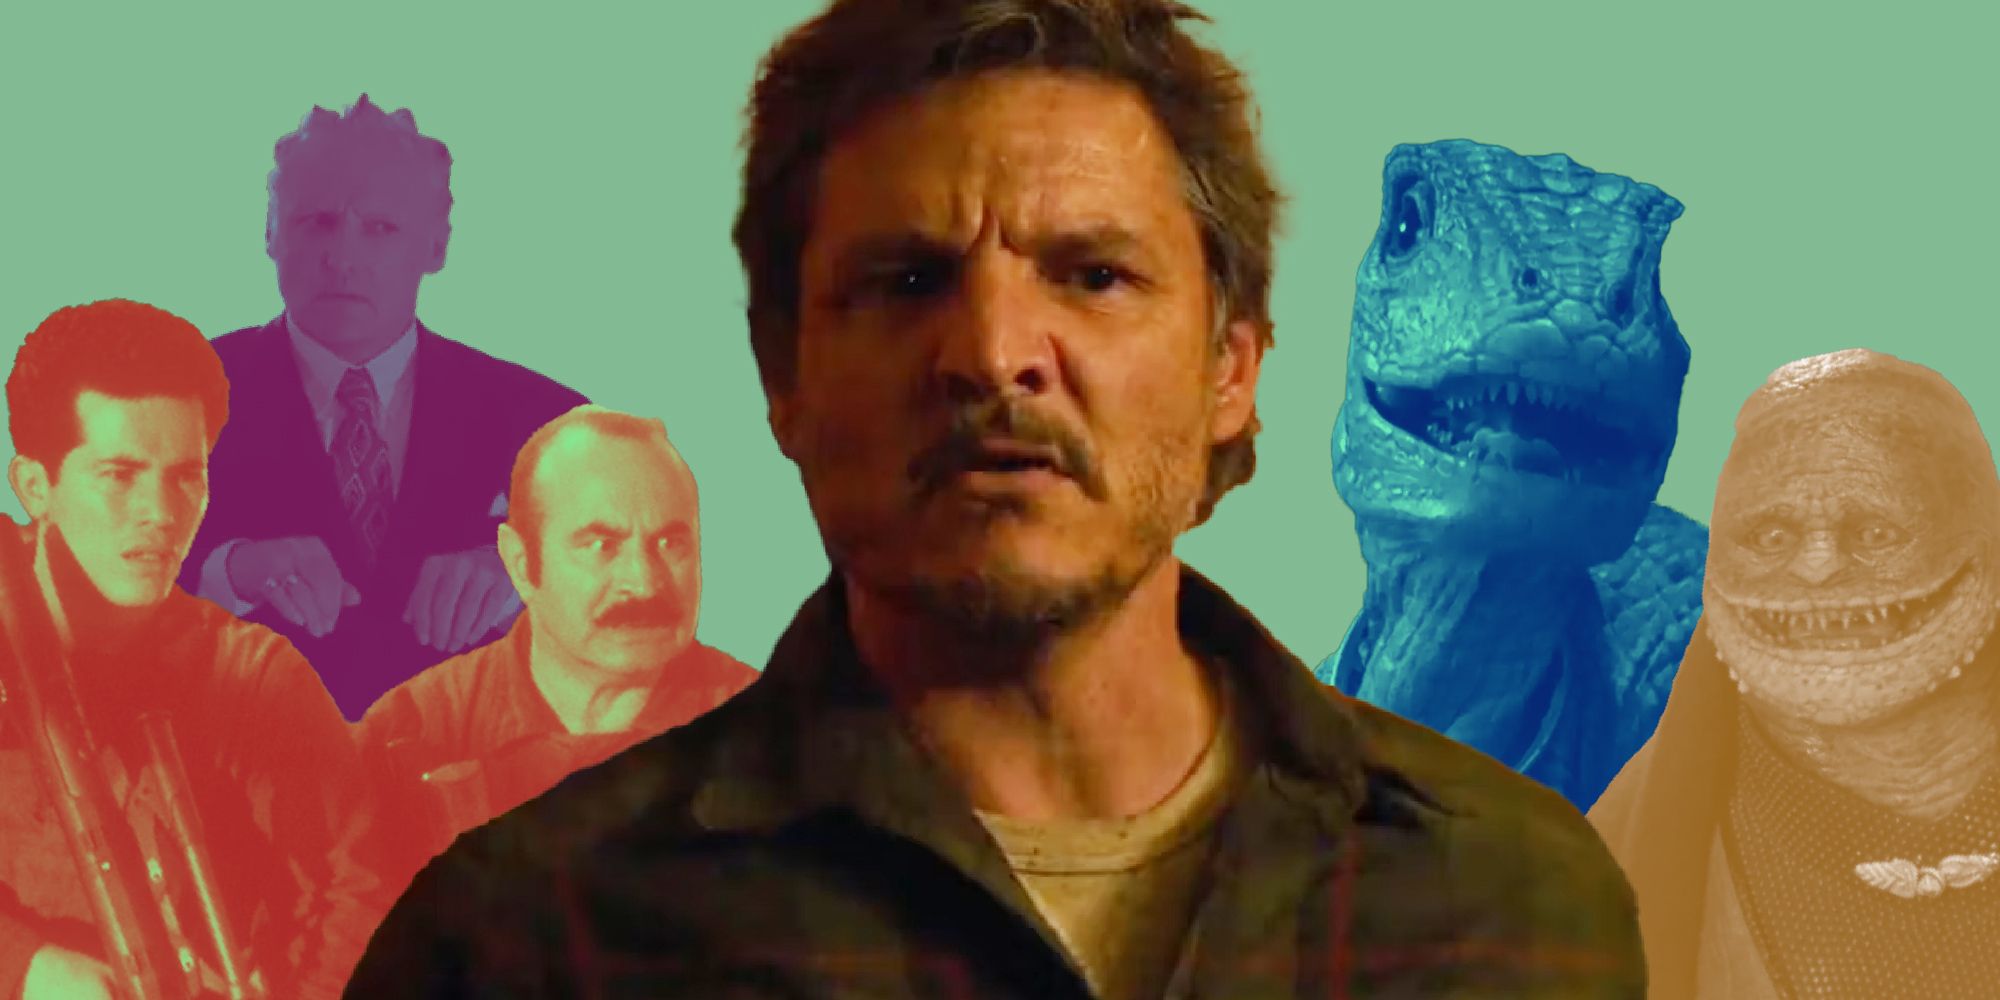 Pedro Pascal As TLOU Joel With Mario Characters From The '90s Movie In The Background